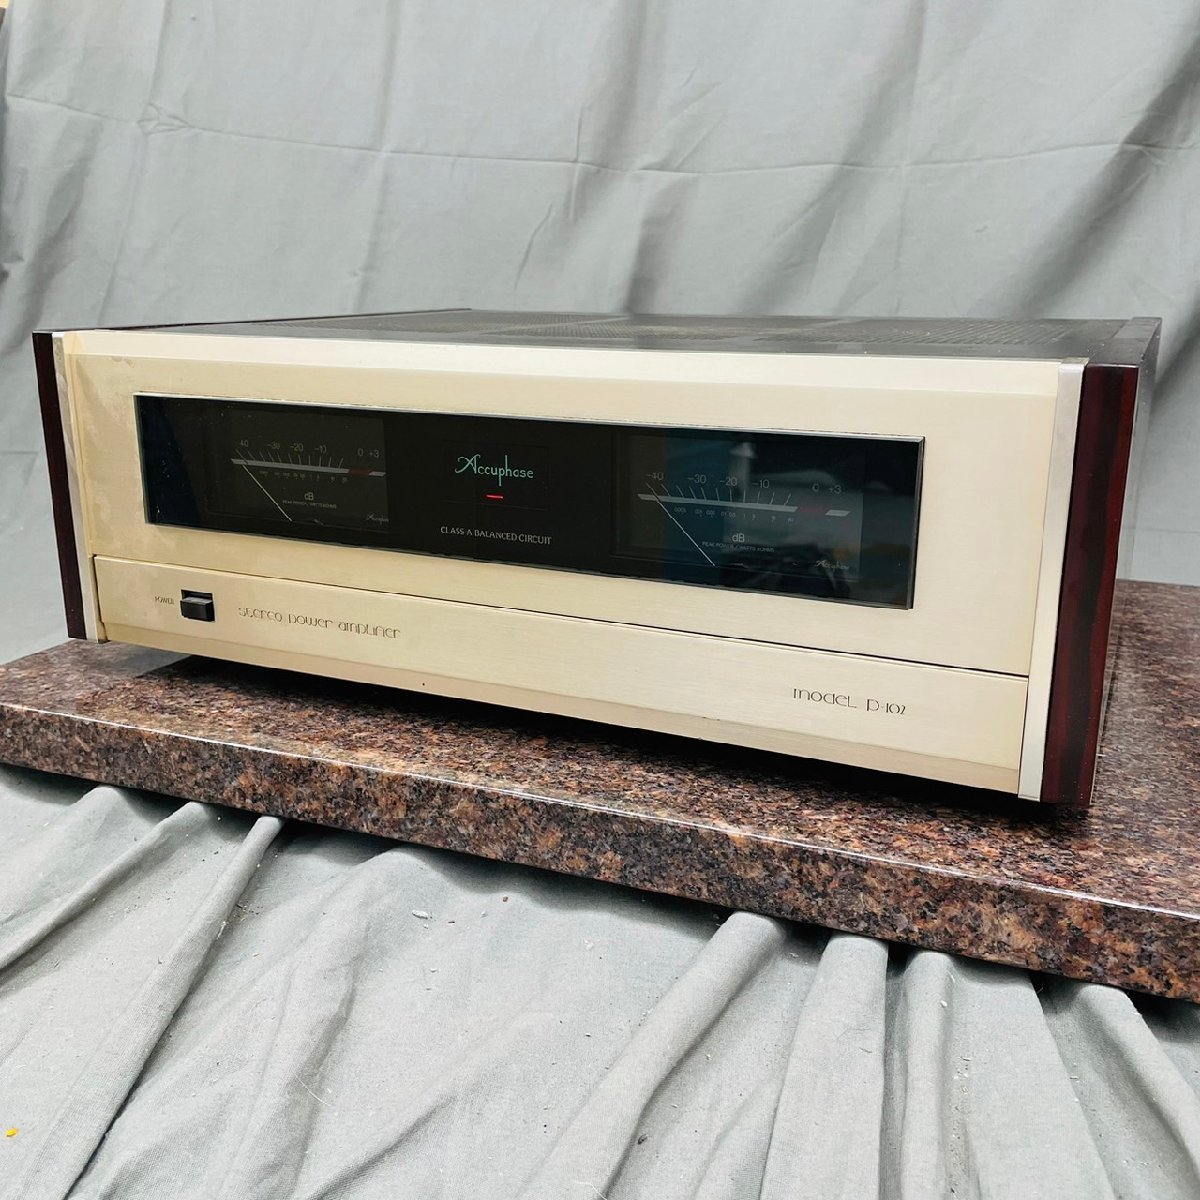 T4063＊【ジャンク】Accuphase アキュフェーズ P-102 ステレオパワーアンプ_画像1